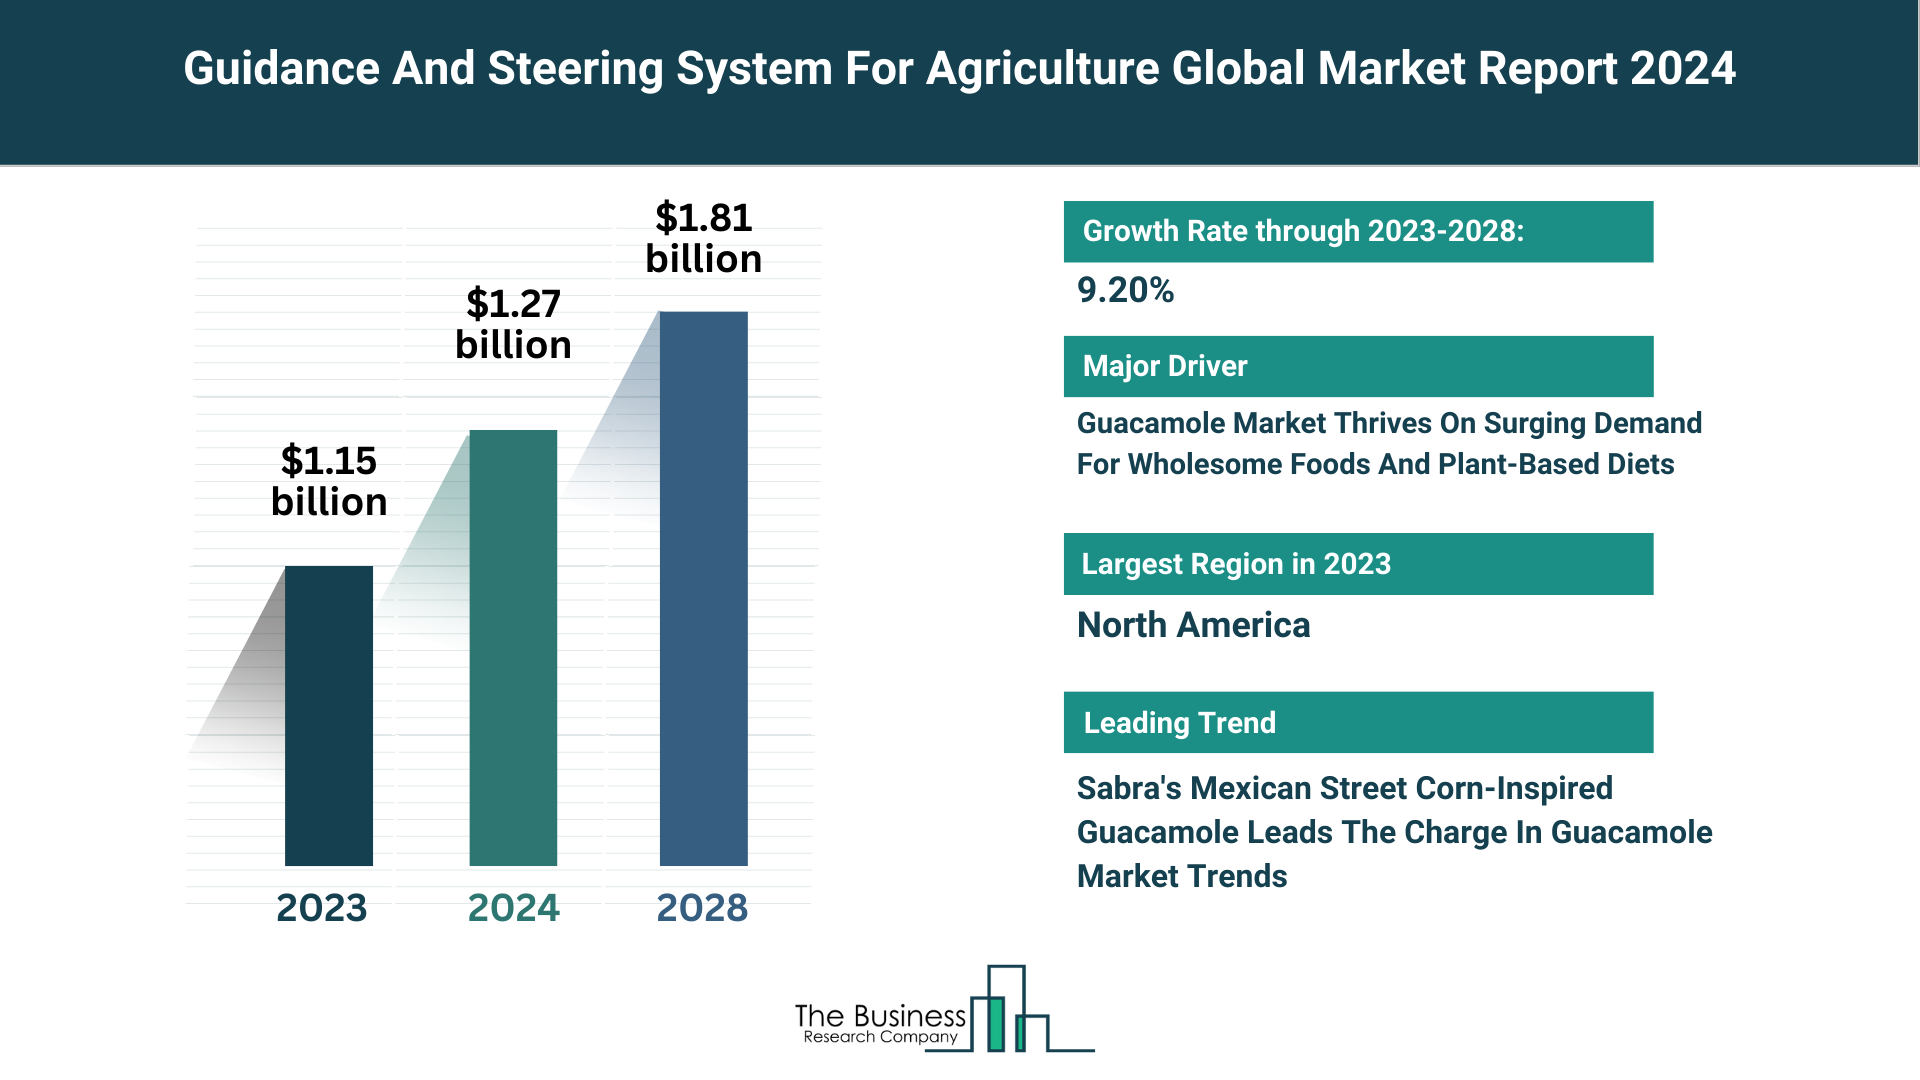 Global Guidance And Steering System For Agriculture Market Analysis: Size, Drivers, Trends, Opportunities And Strategies